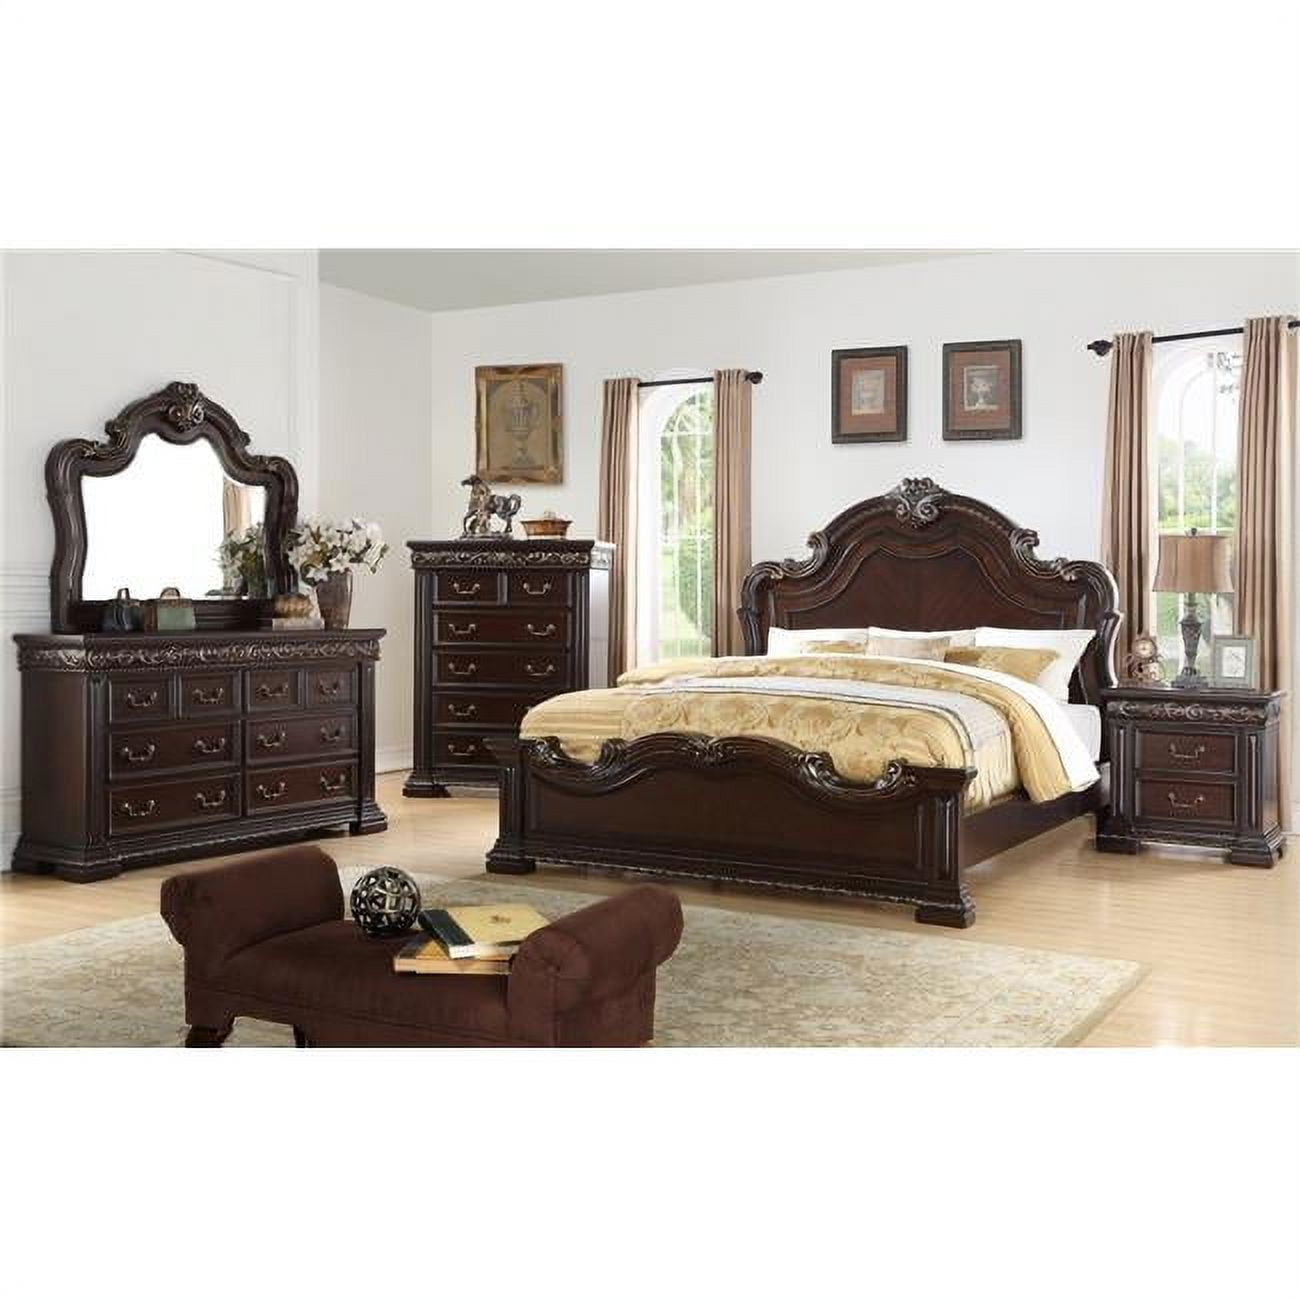 Picture of Best Master Furniture B1005 5PC Eastern King Set Africa Dark Cherry King Size Set - 5 Piece